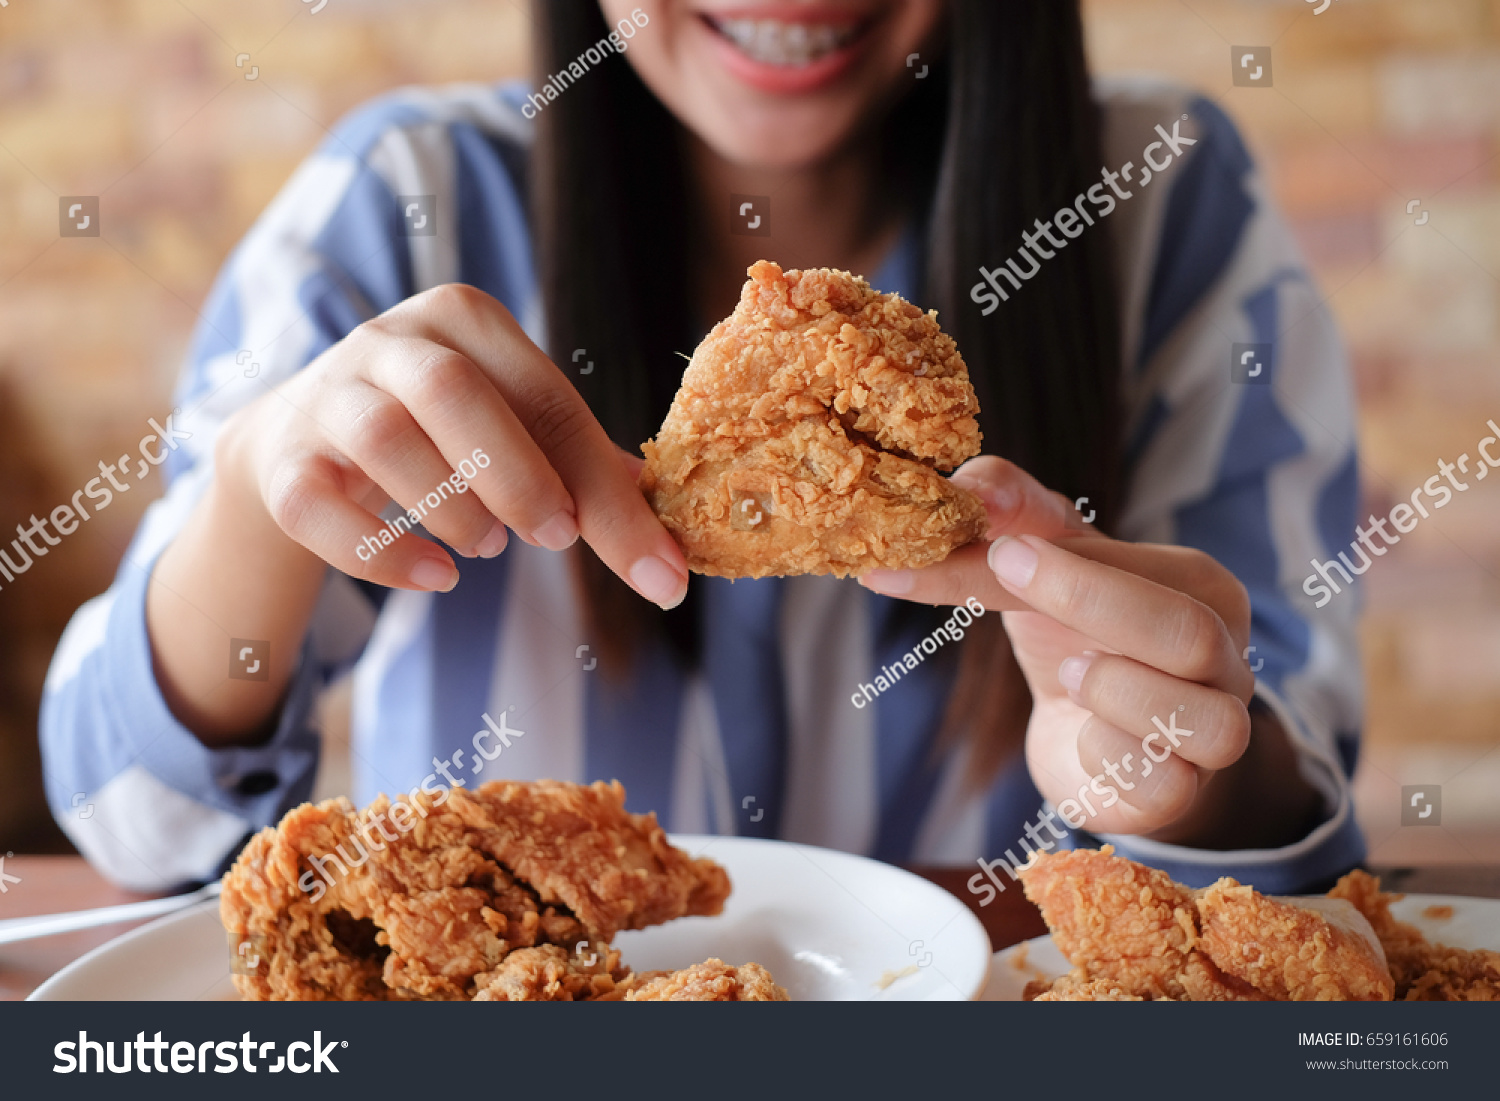 close up focus woman hand hold fried chicken for eat,girl with fast food concept #659161606